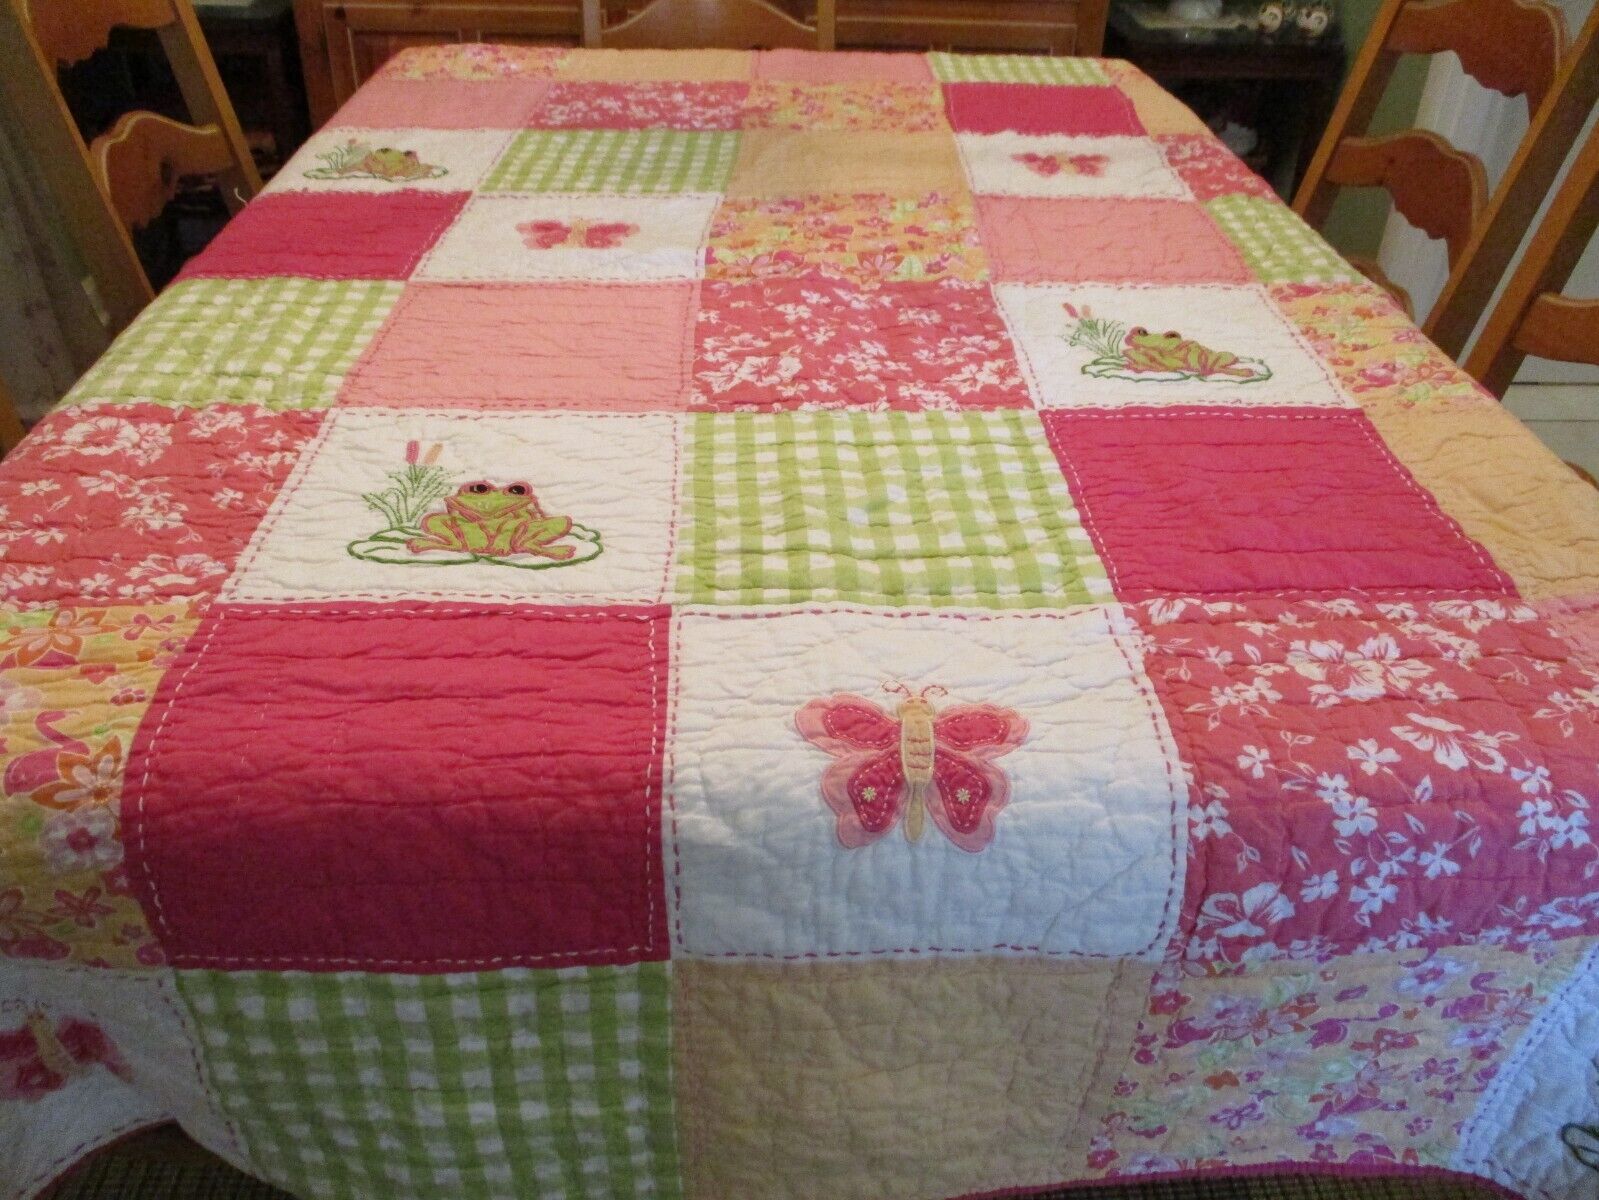 Britannica Home Fashions Hand Stitched Quilt Blanket Bright Pink Tropical 70x80 